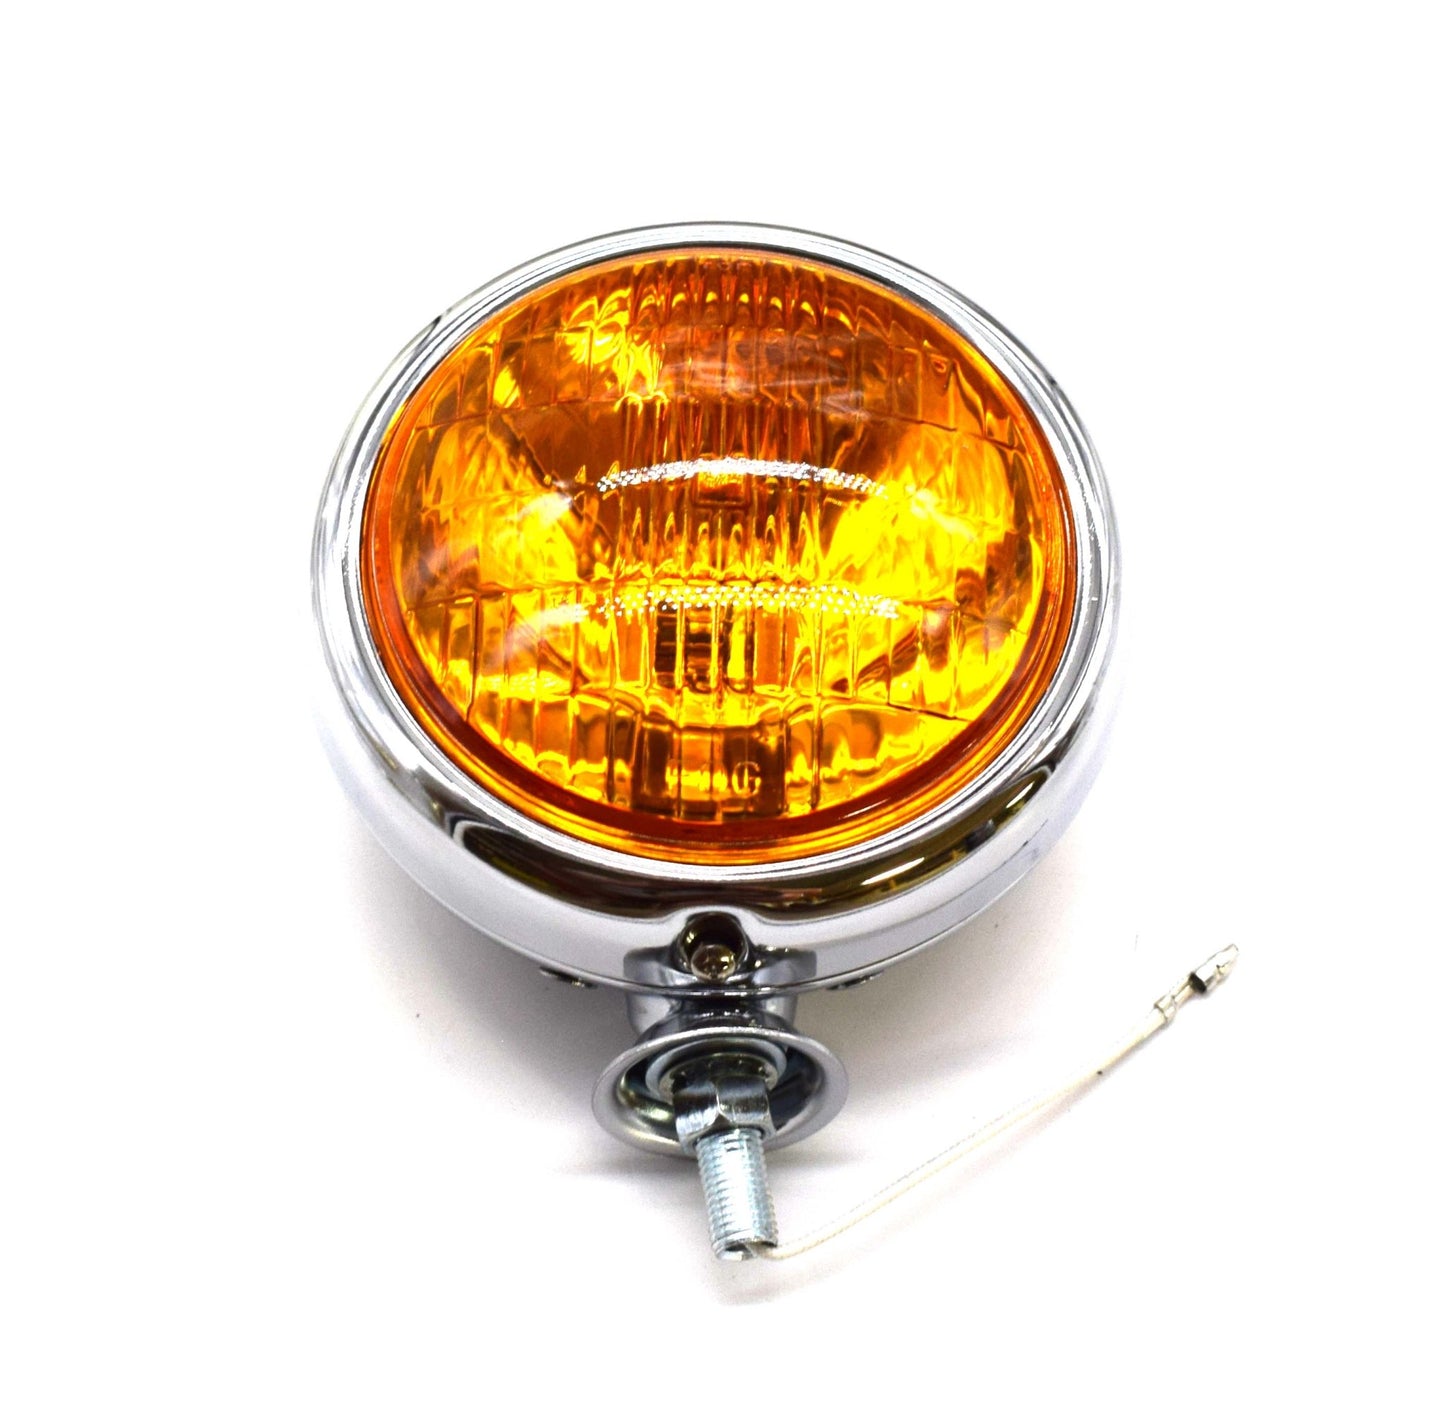 Fog Light Set, Amber, 1946-1986, Willys and Jeep, CJ, Pick Up, Station Wagon, Jeepster - The JeepsterMan